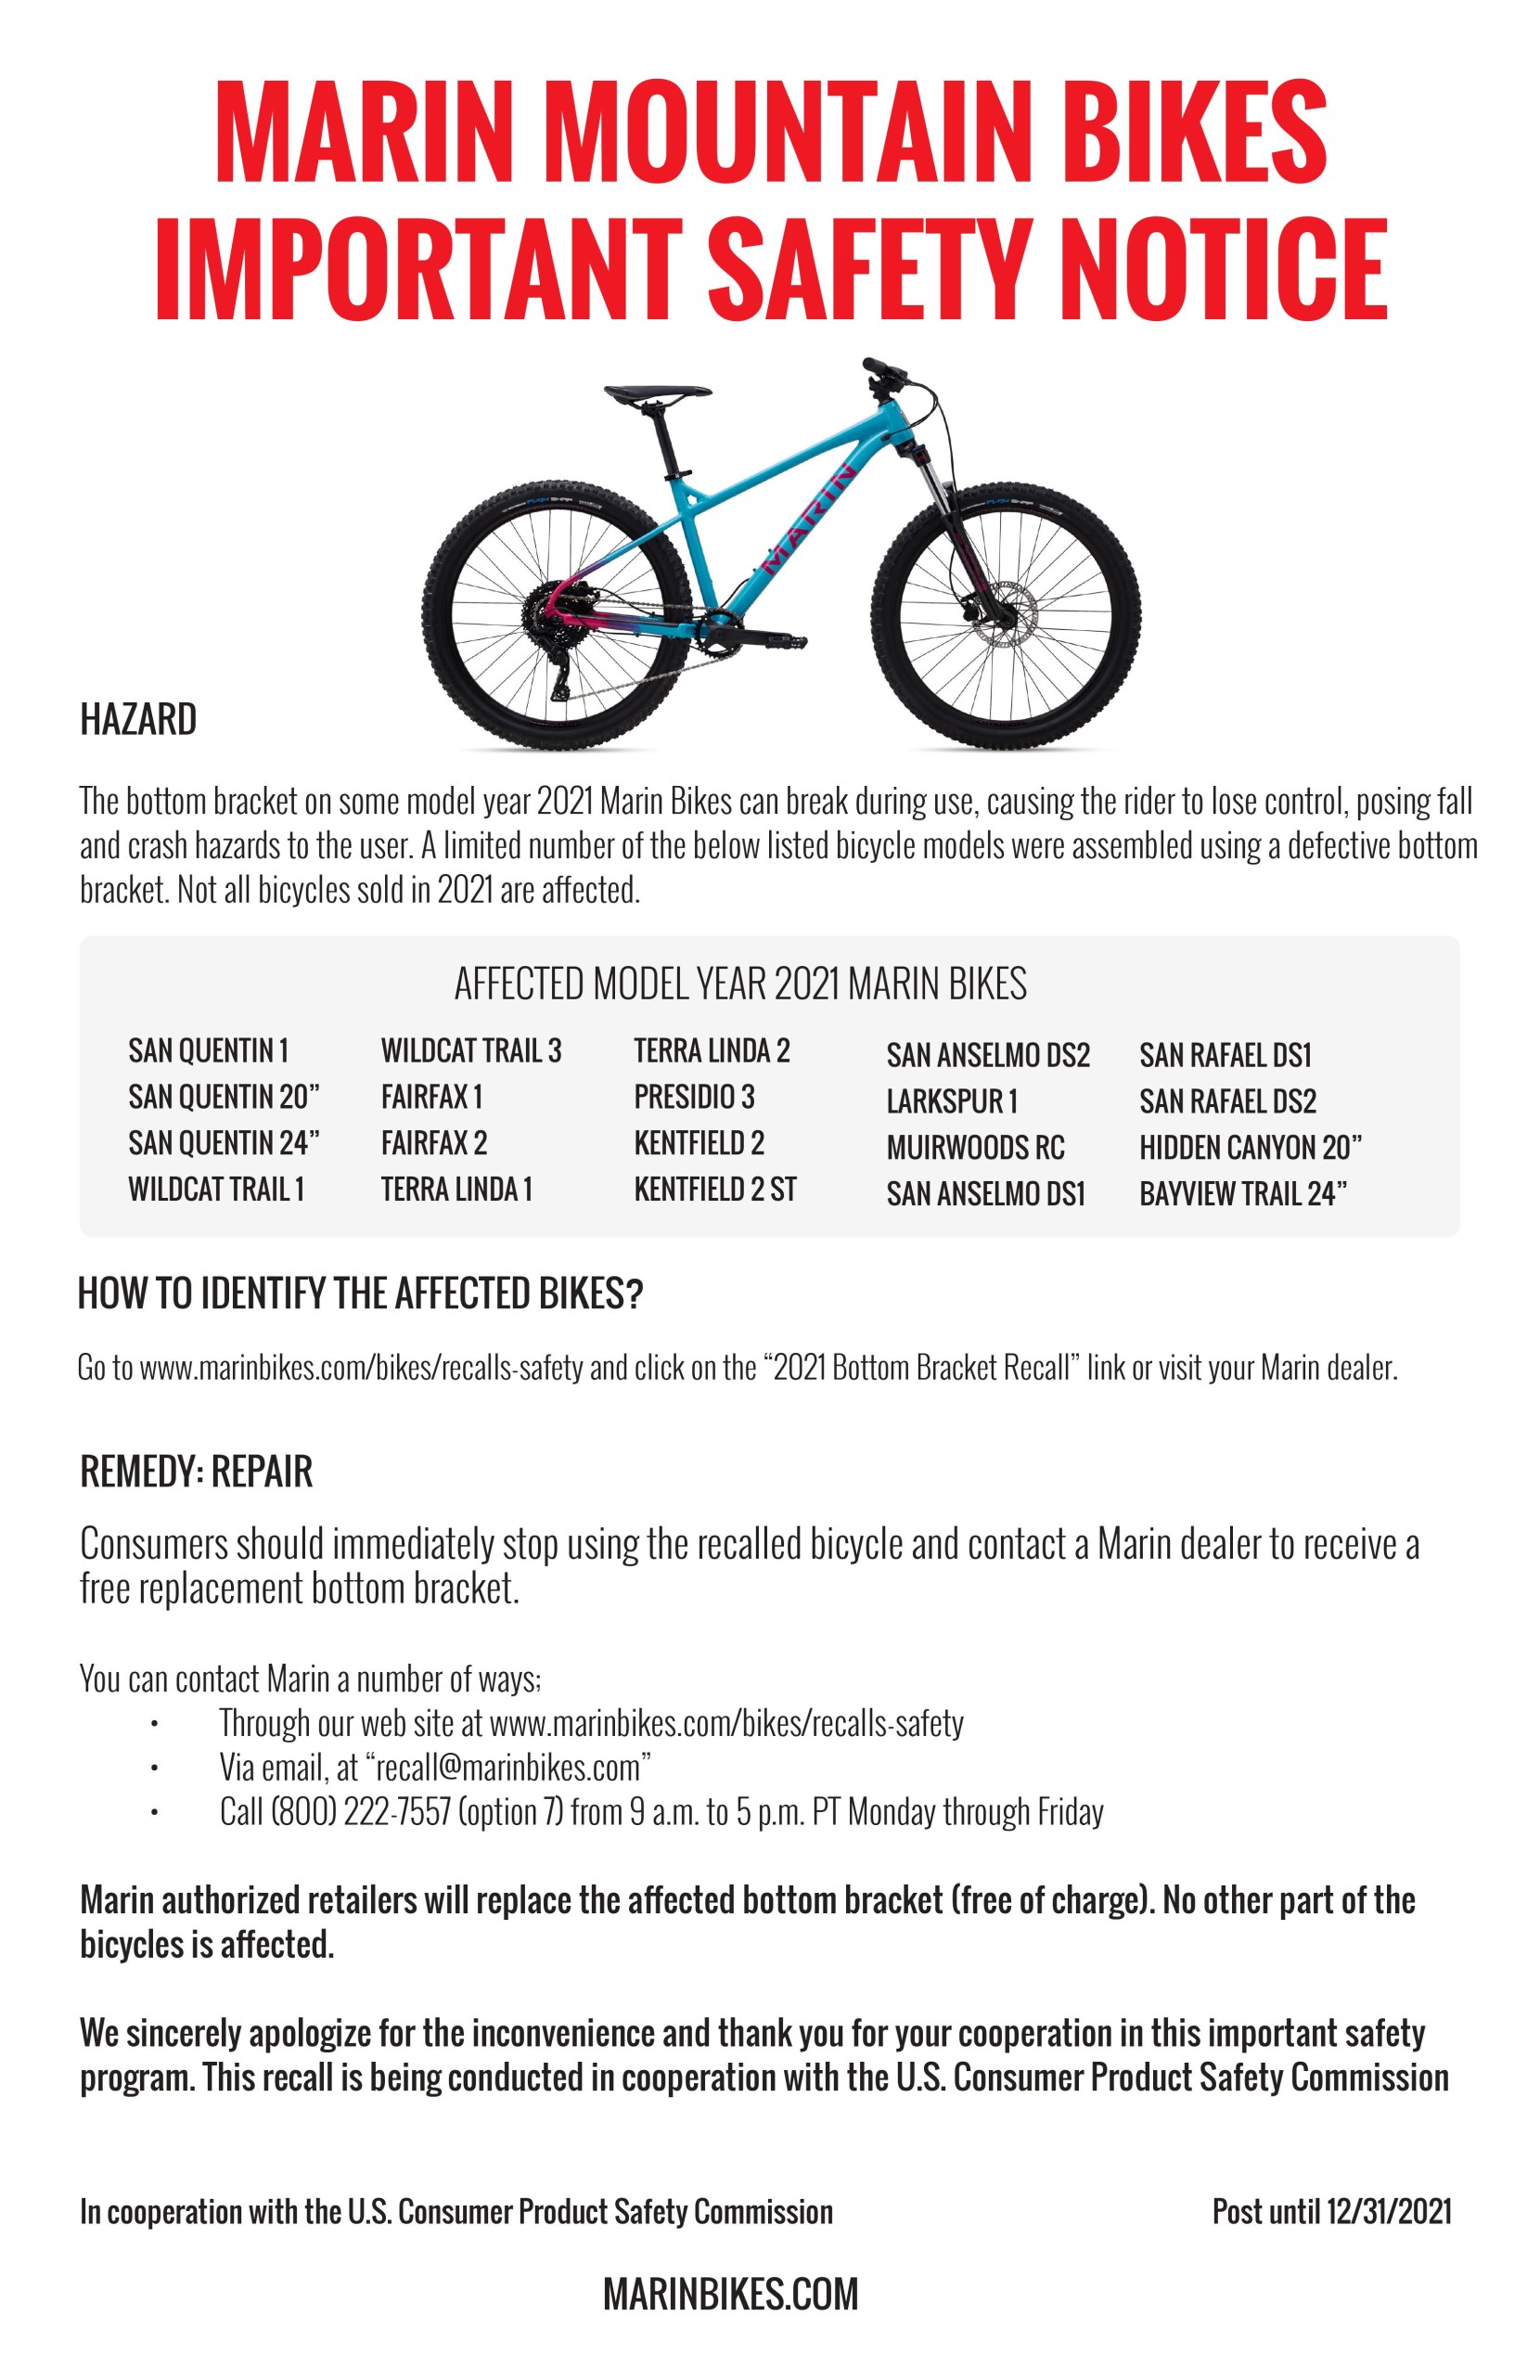 Recall Notice Poster from Rocky Mountain Bikes.